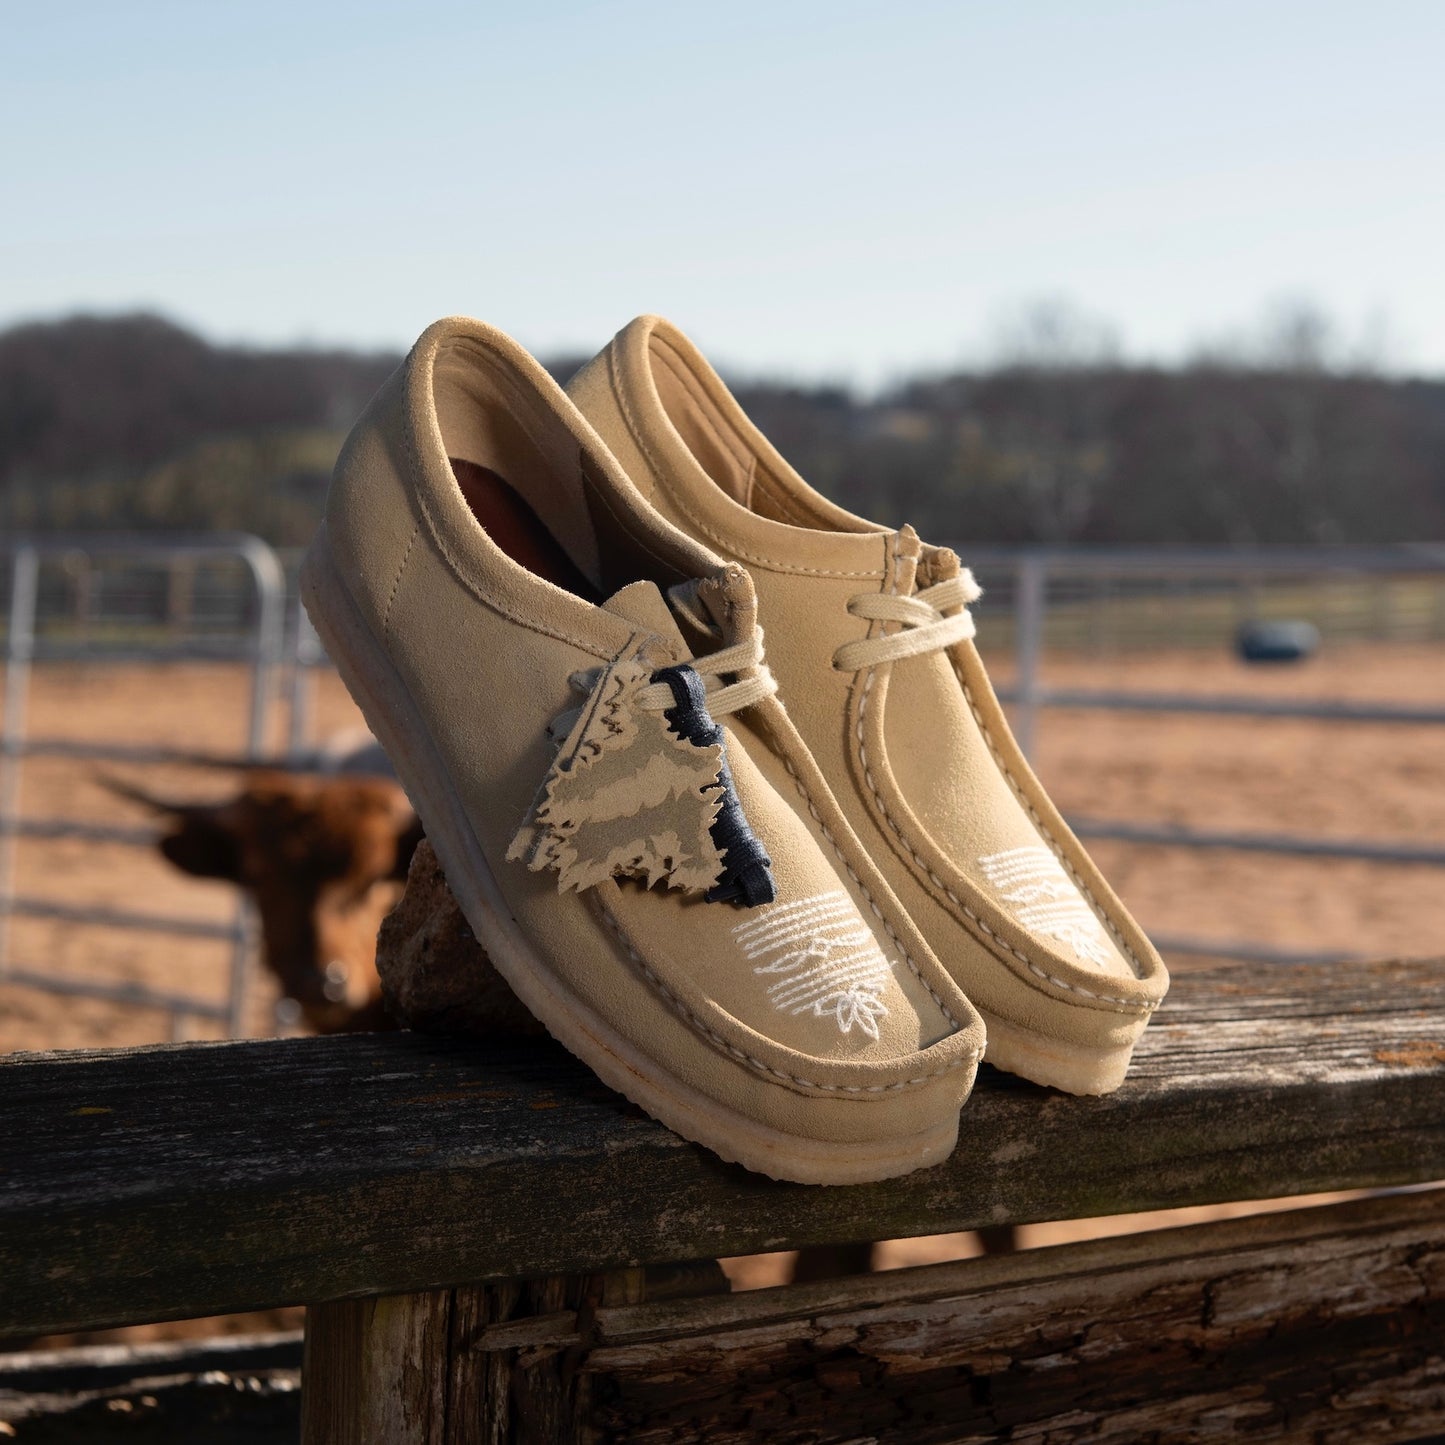 THROWING FITS x CLARKS - WALLABEE